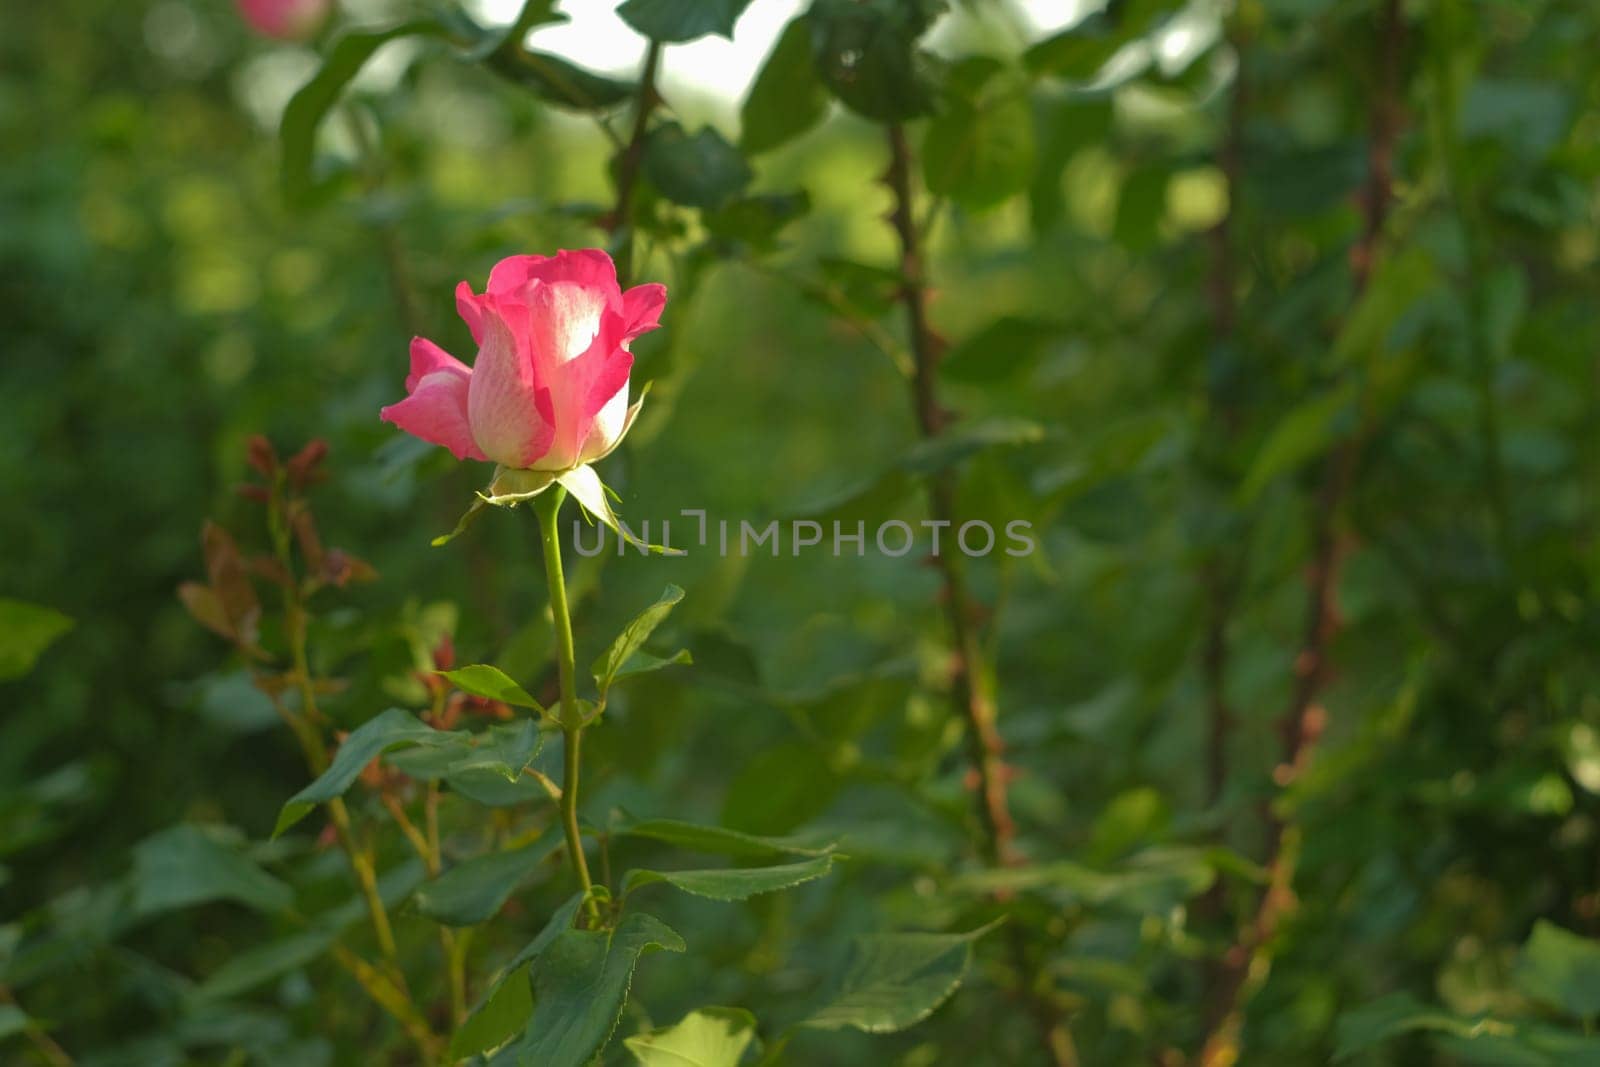 Lonely rose on a background of blurred grass. Flower in the garden. Home gardening.